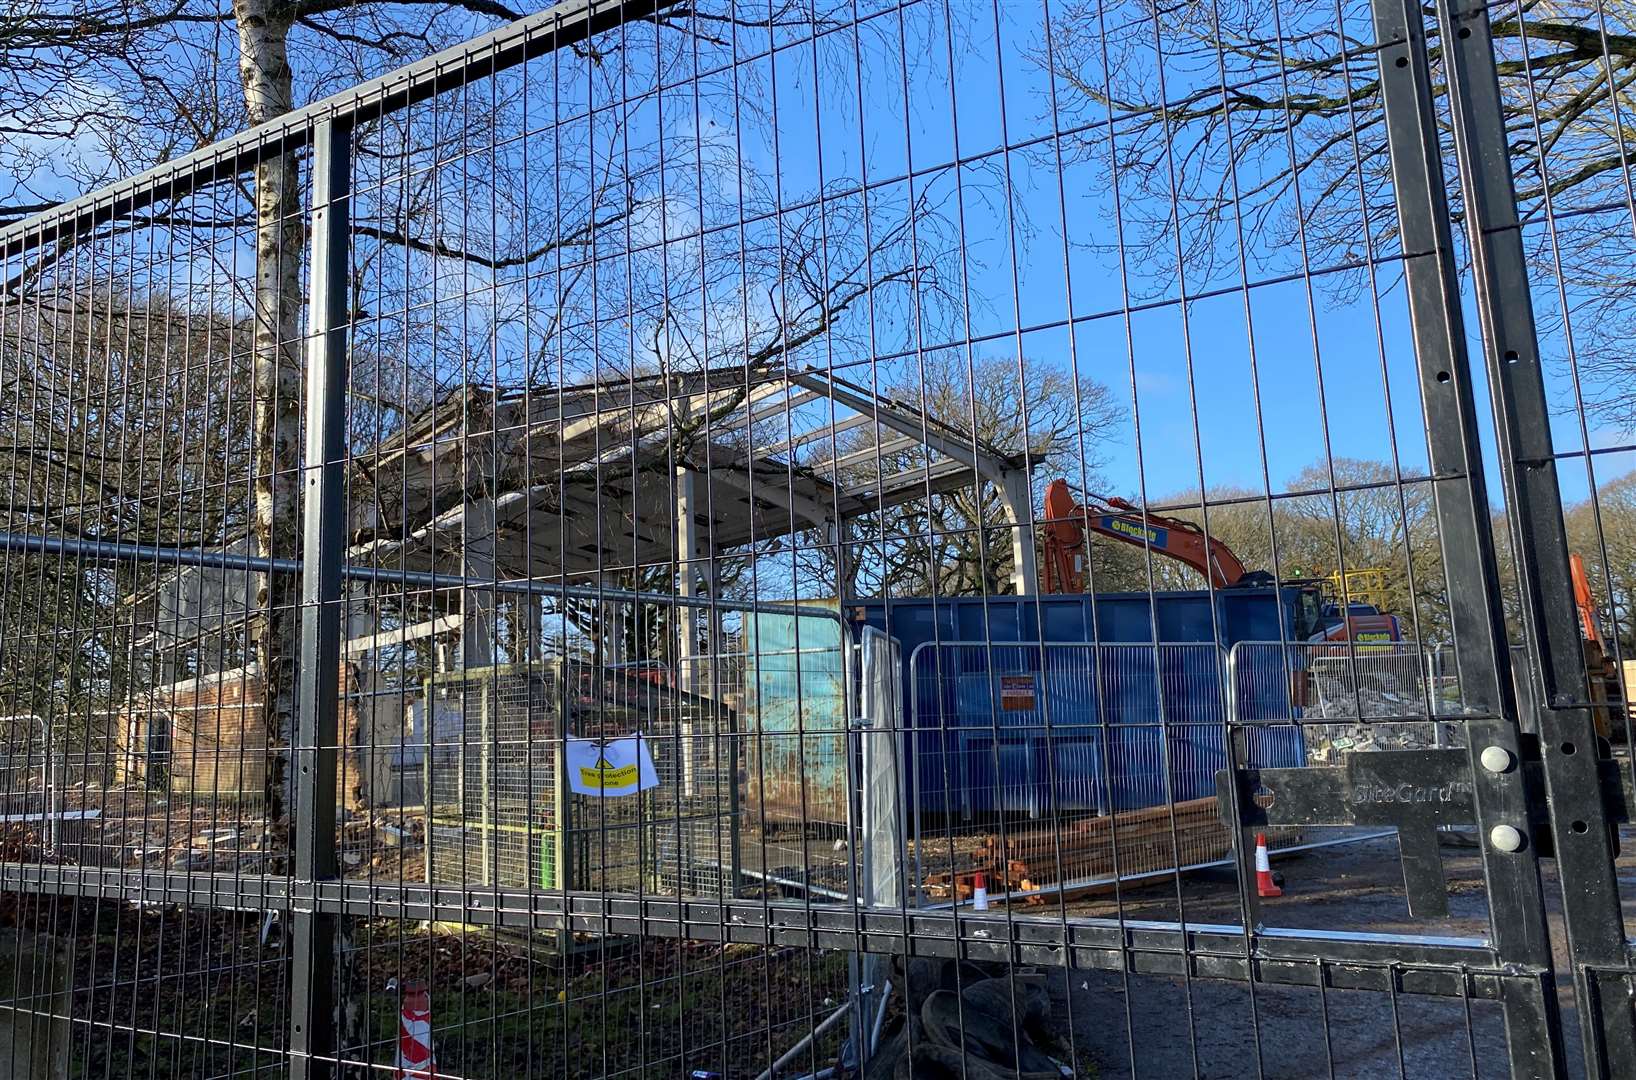 Heather House in Park Wood, Maidstone, is being demolished